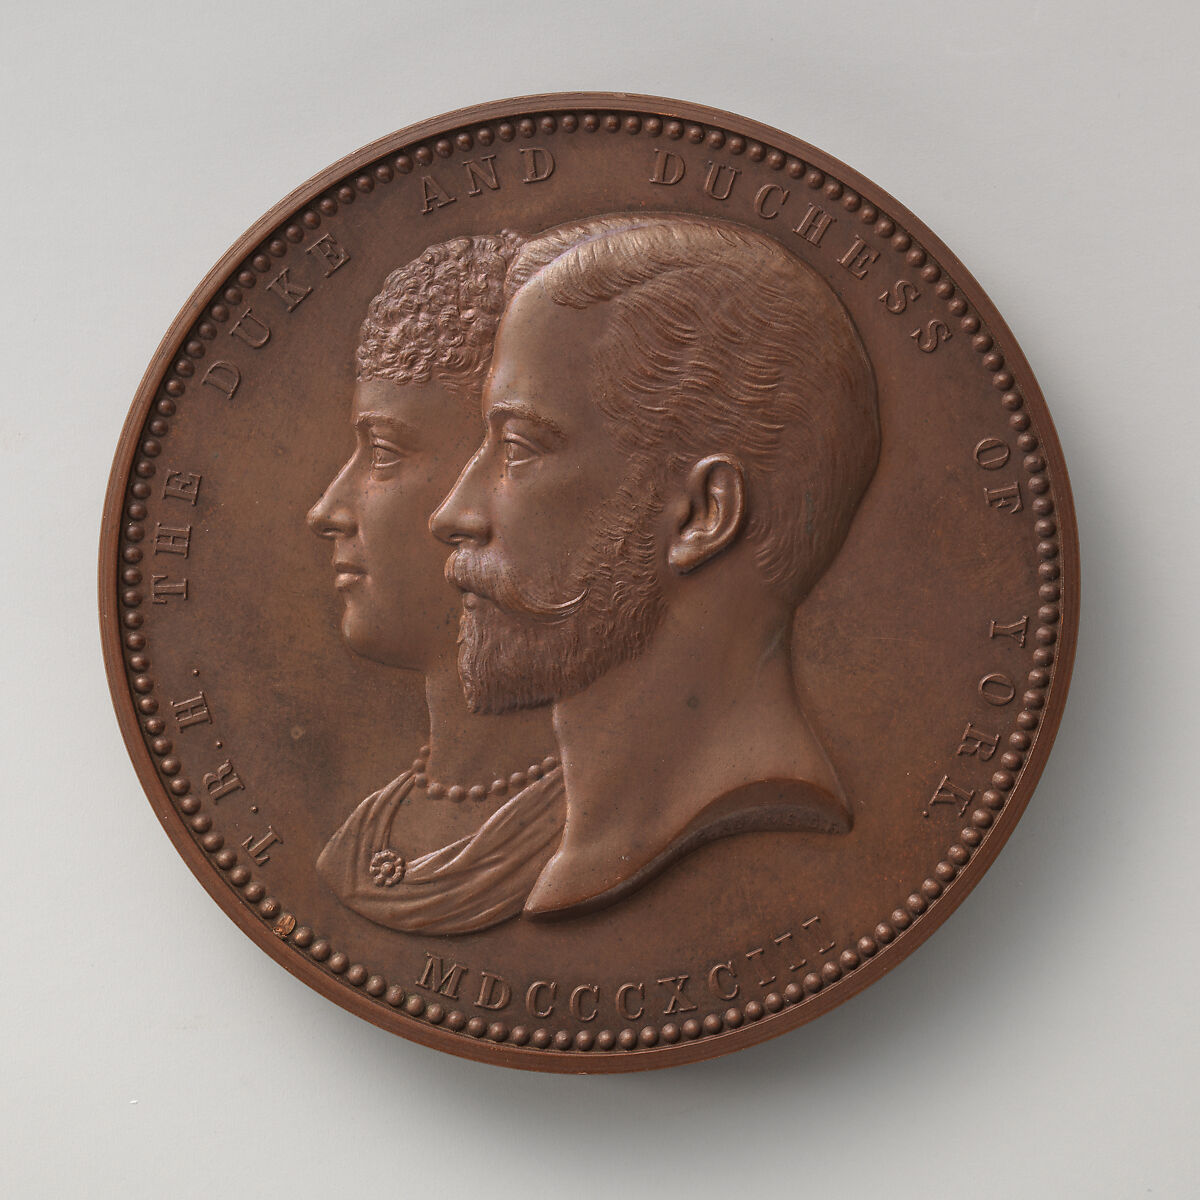 The Marriage and Visit to the City of the Duke and Duchess of York, July 6, 1893, Medalist: George Gammon Adams (British, Staines 1821–1898 Chiswick), Bronze, struck, British 